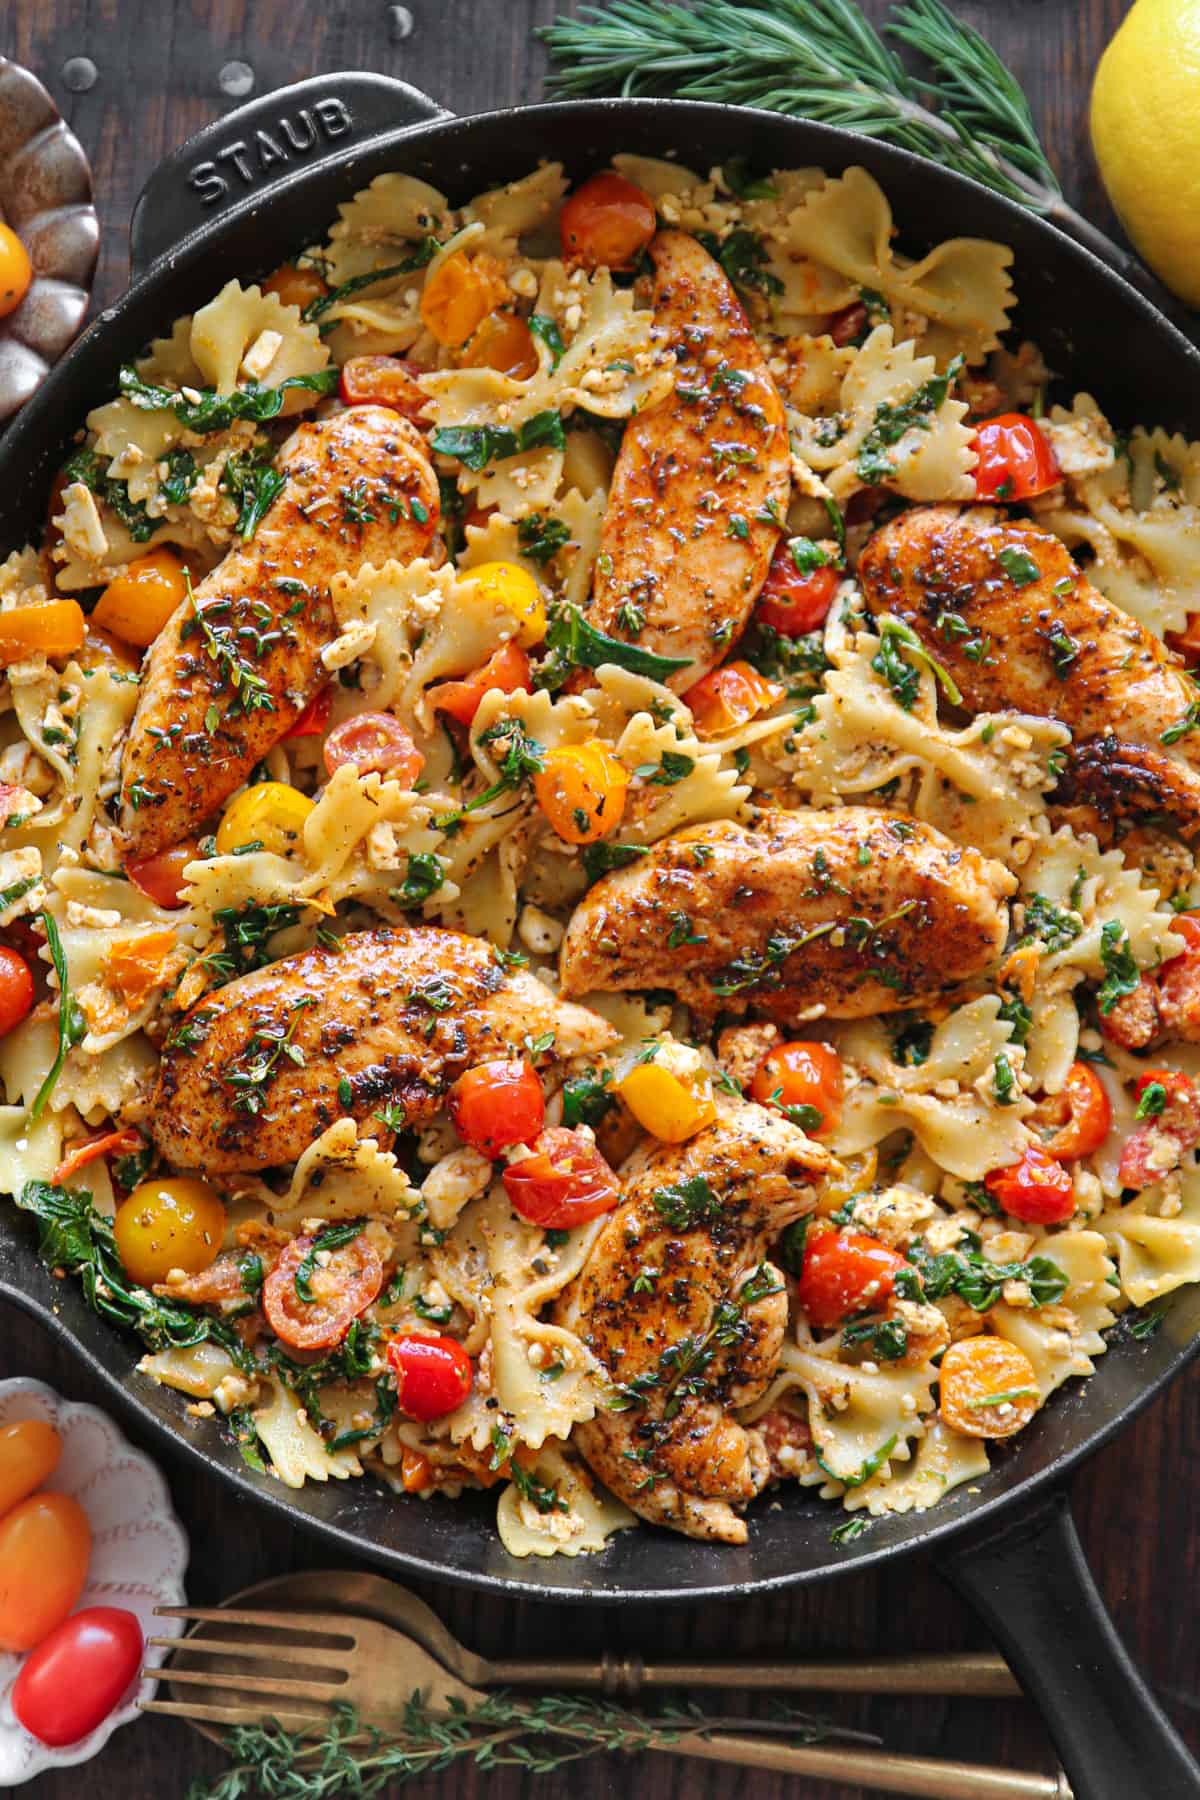 Chicken Feta Pasta with bow-tie pasta, tomatoes, and spinach - in a cast iron skillet.